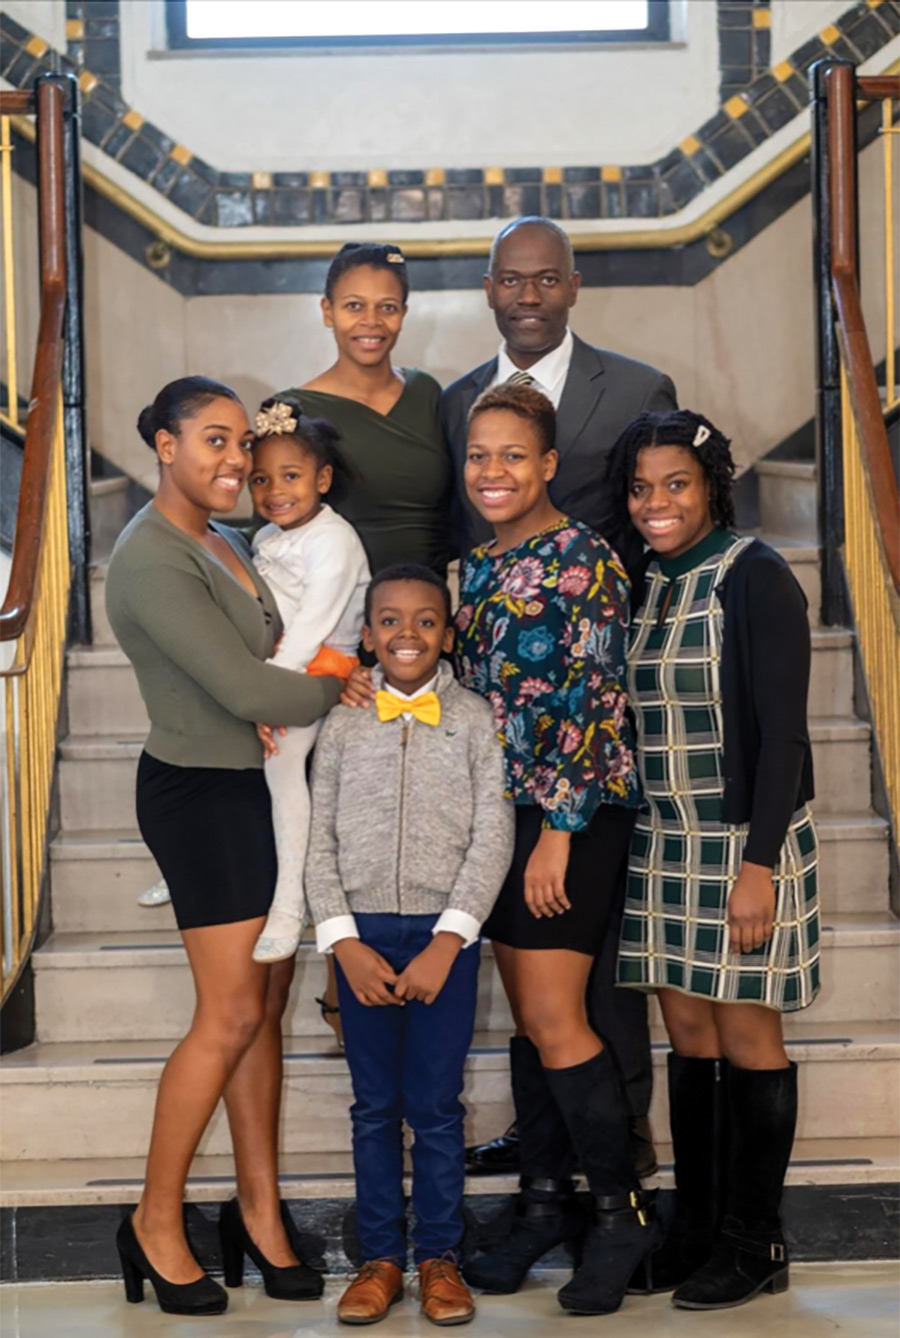 Aisha and Maurice Edwards, surrounded by their children